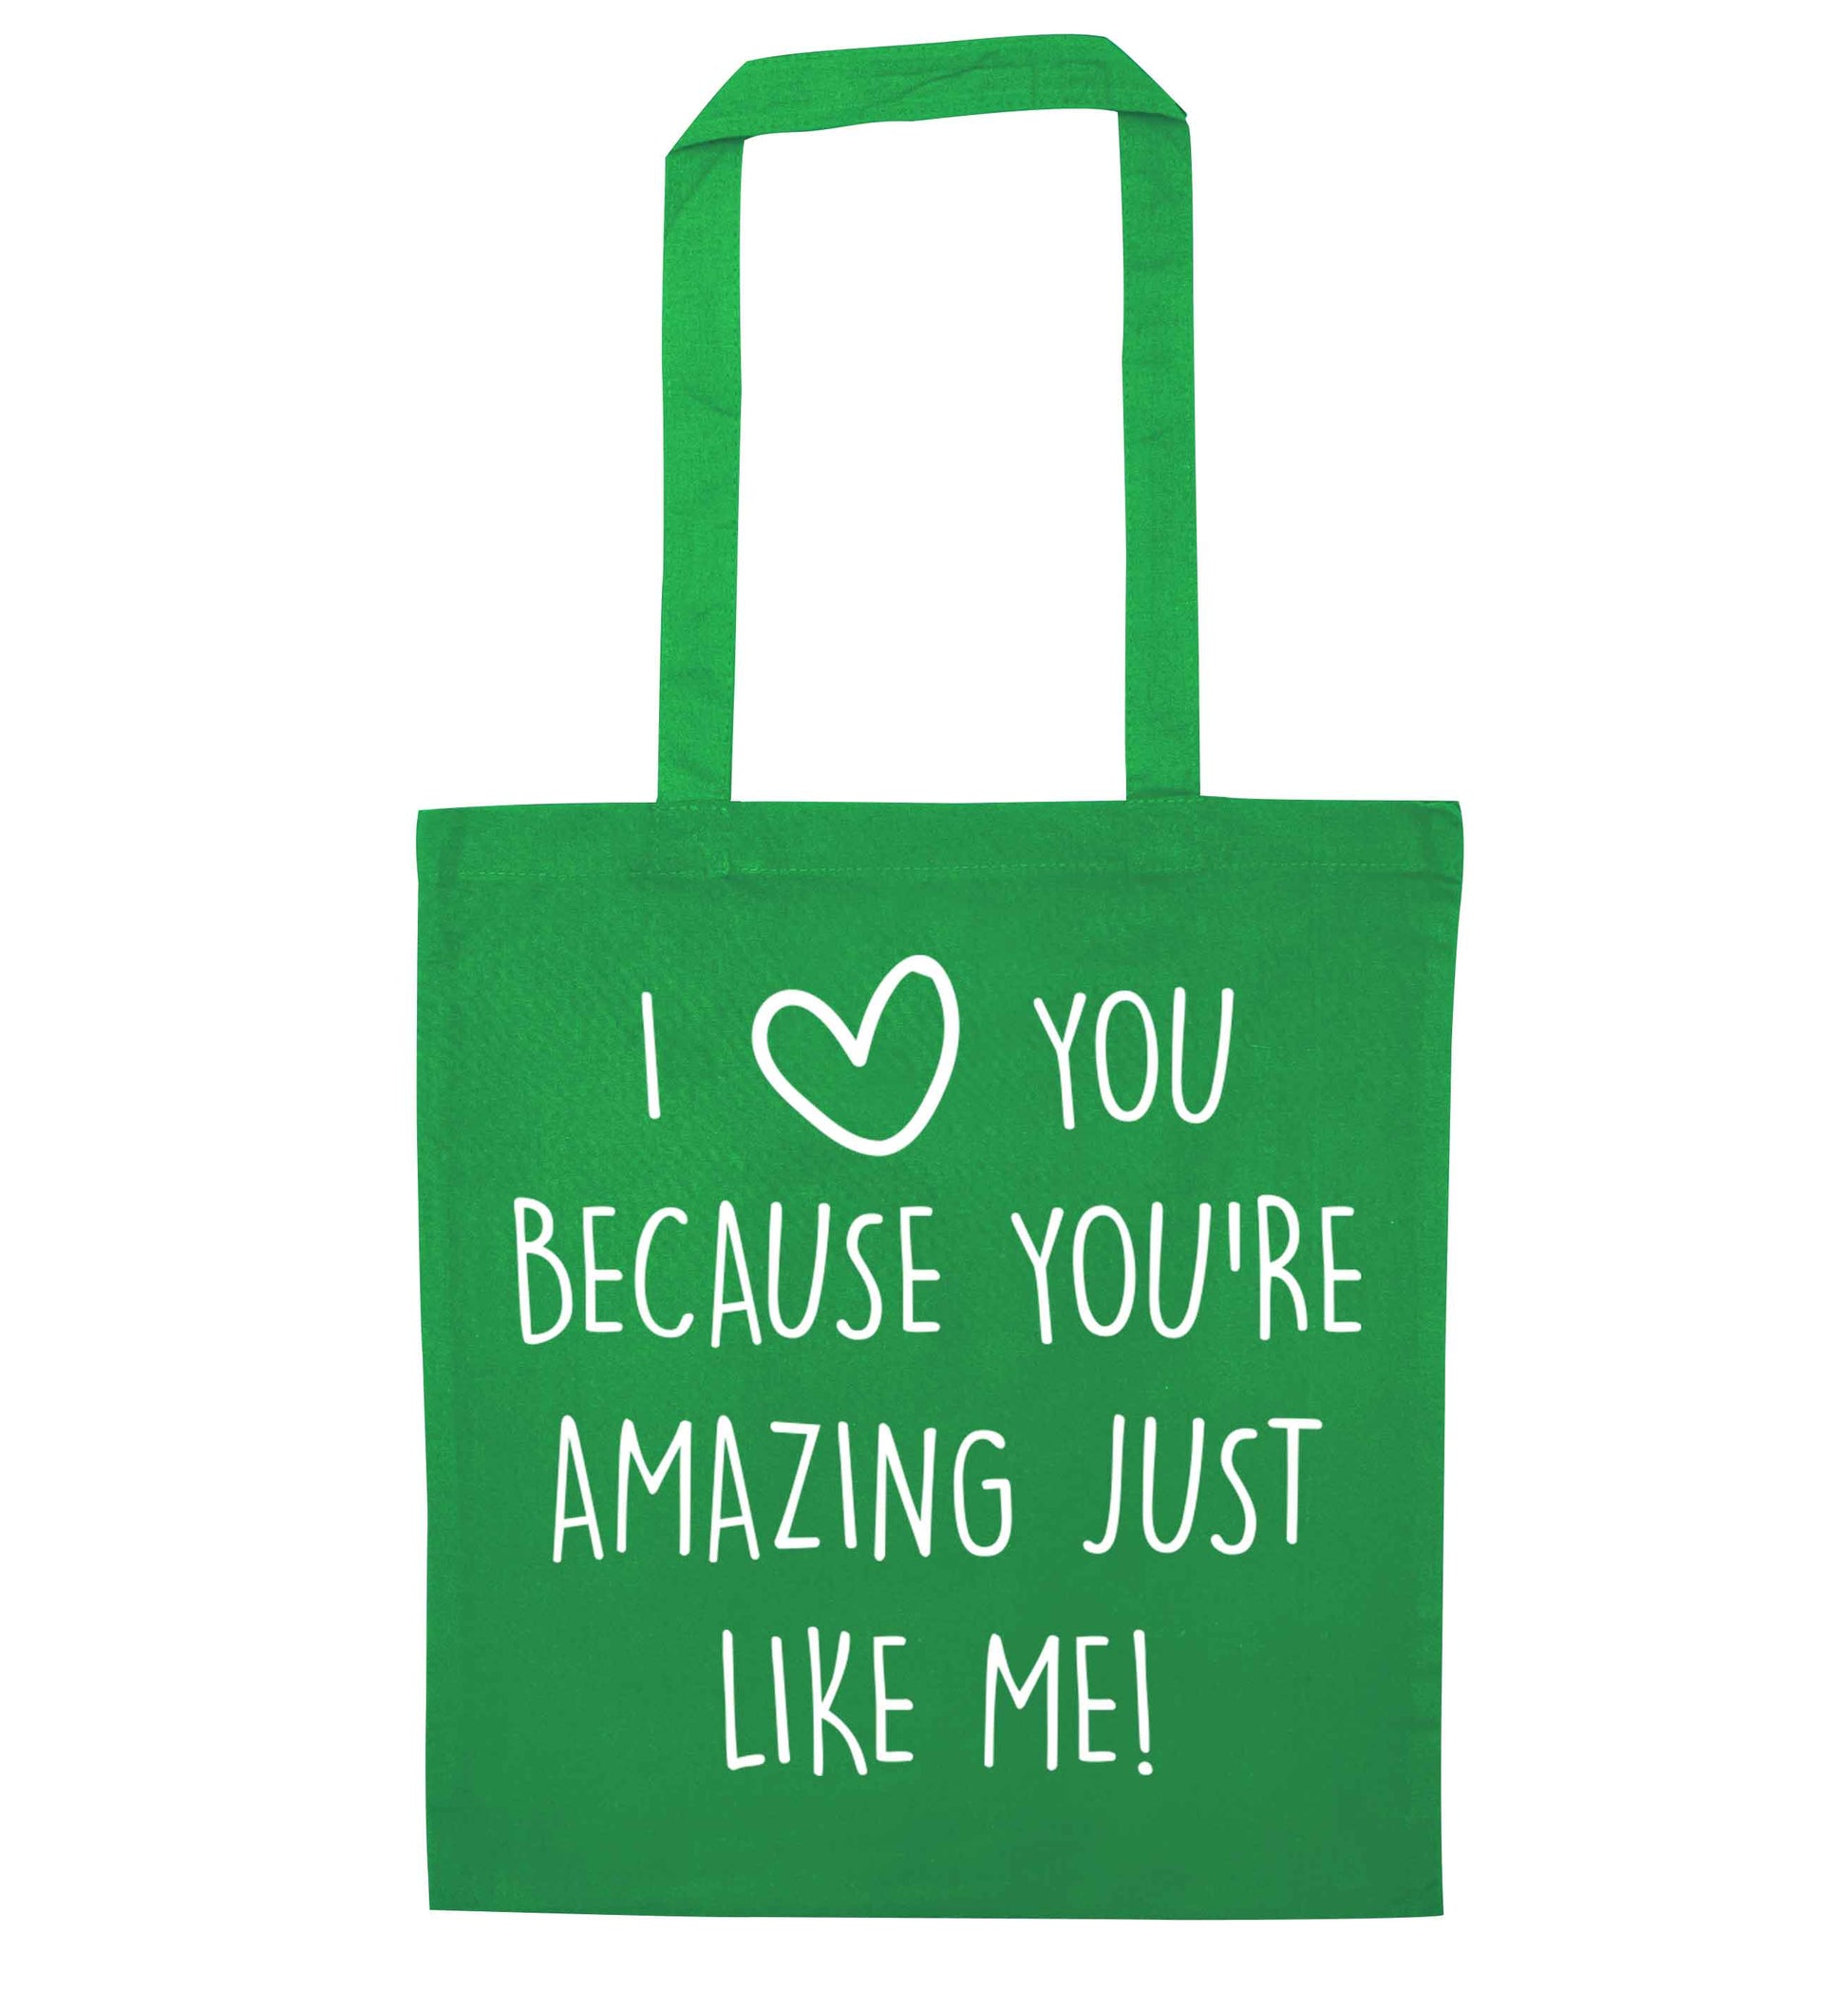 I love you because you're amazing just like me green tote bag